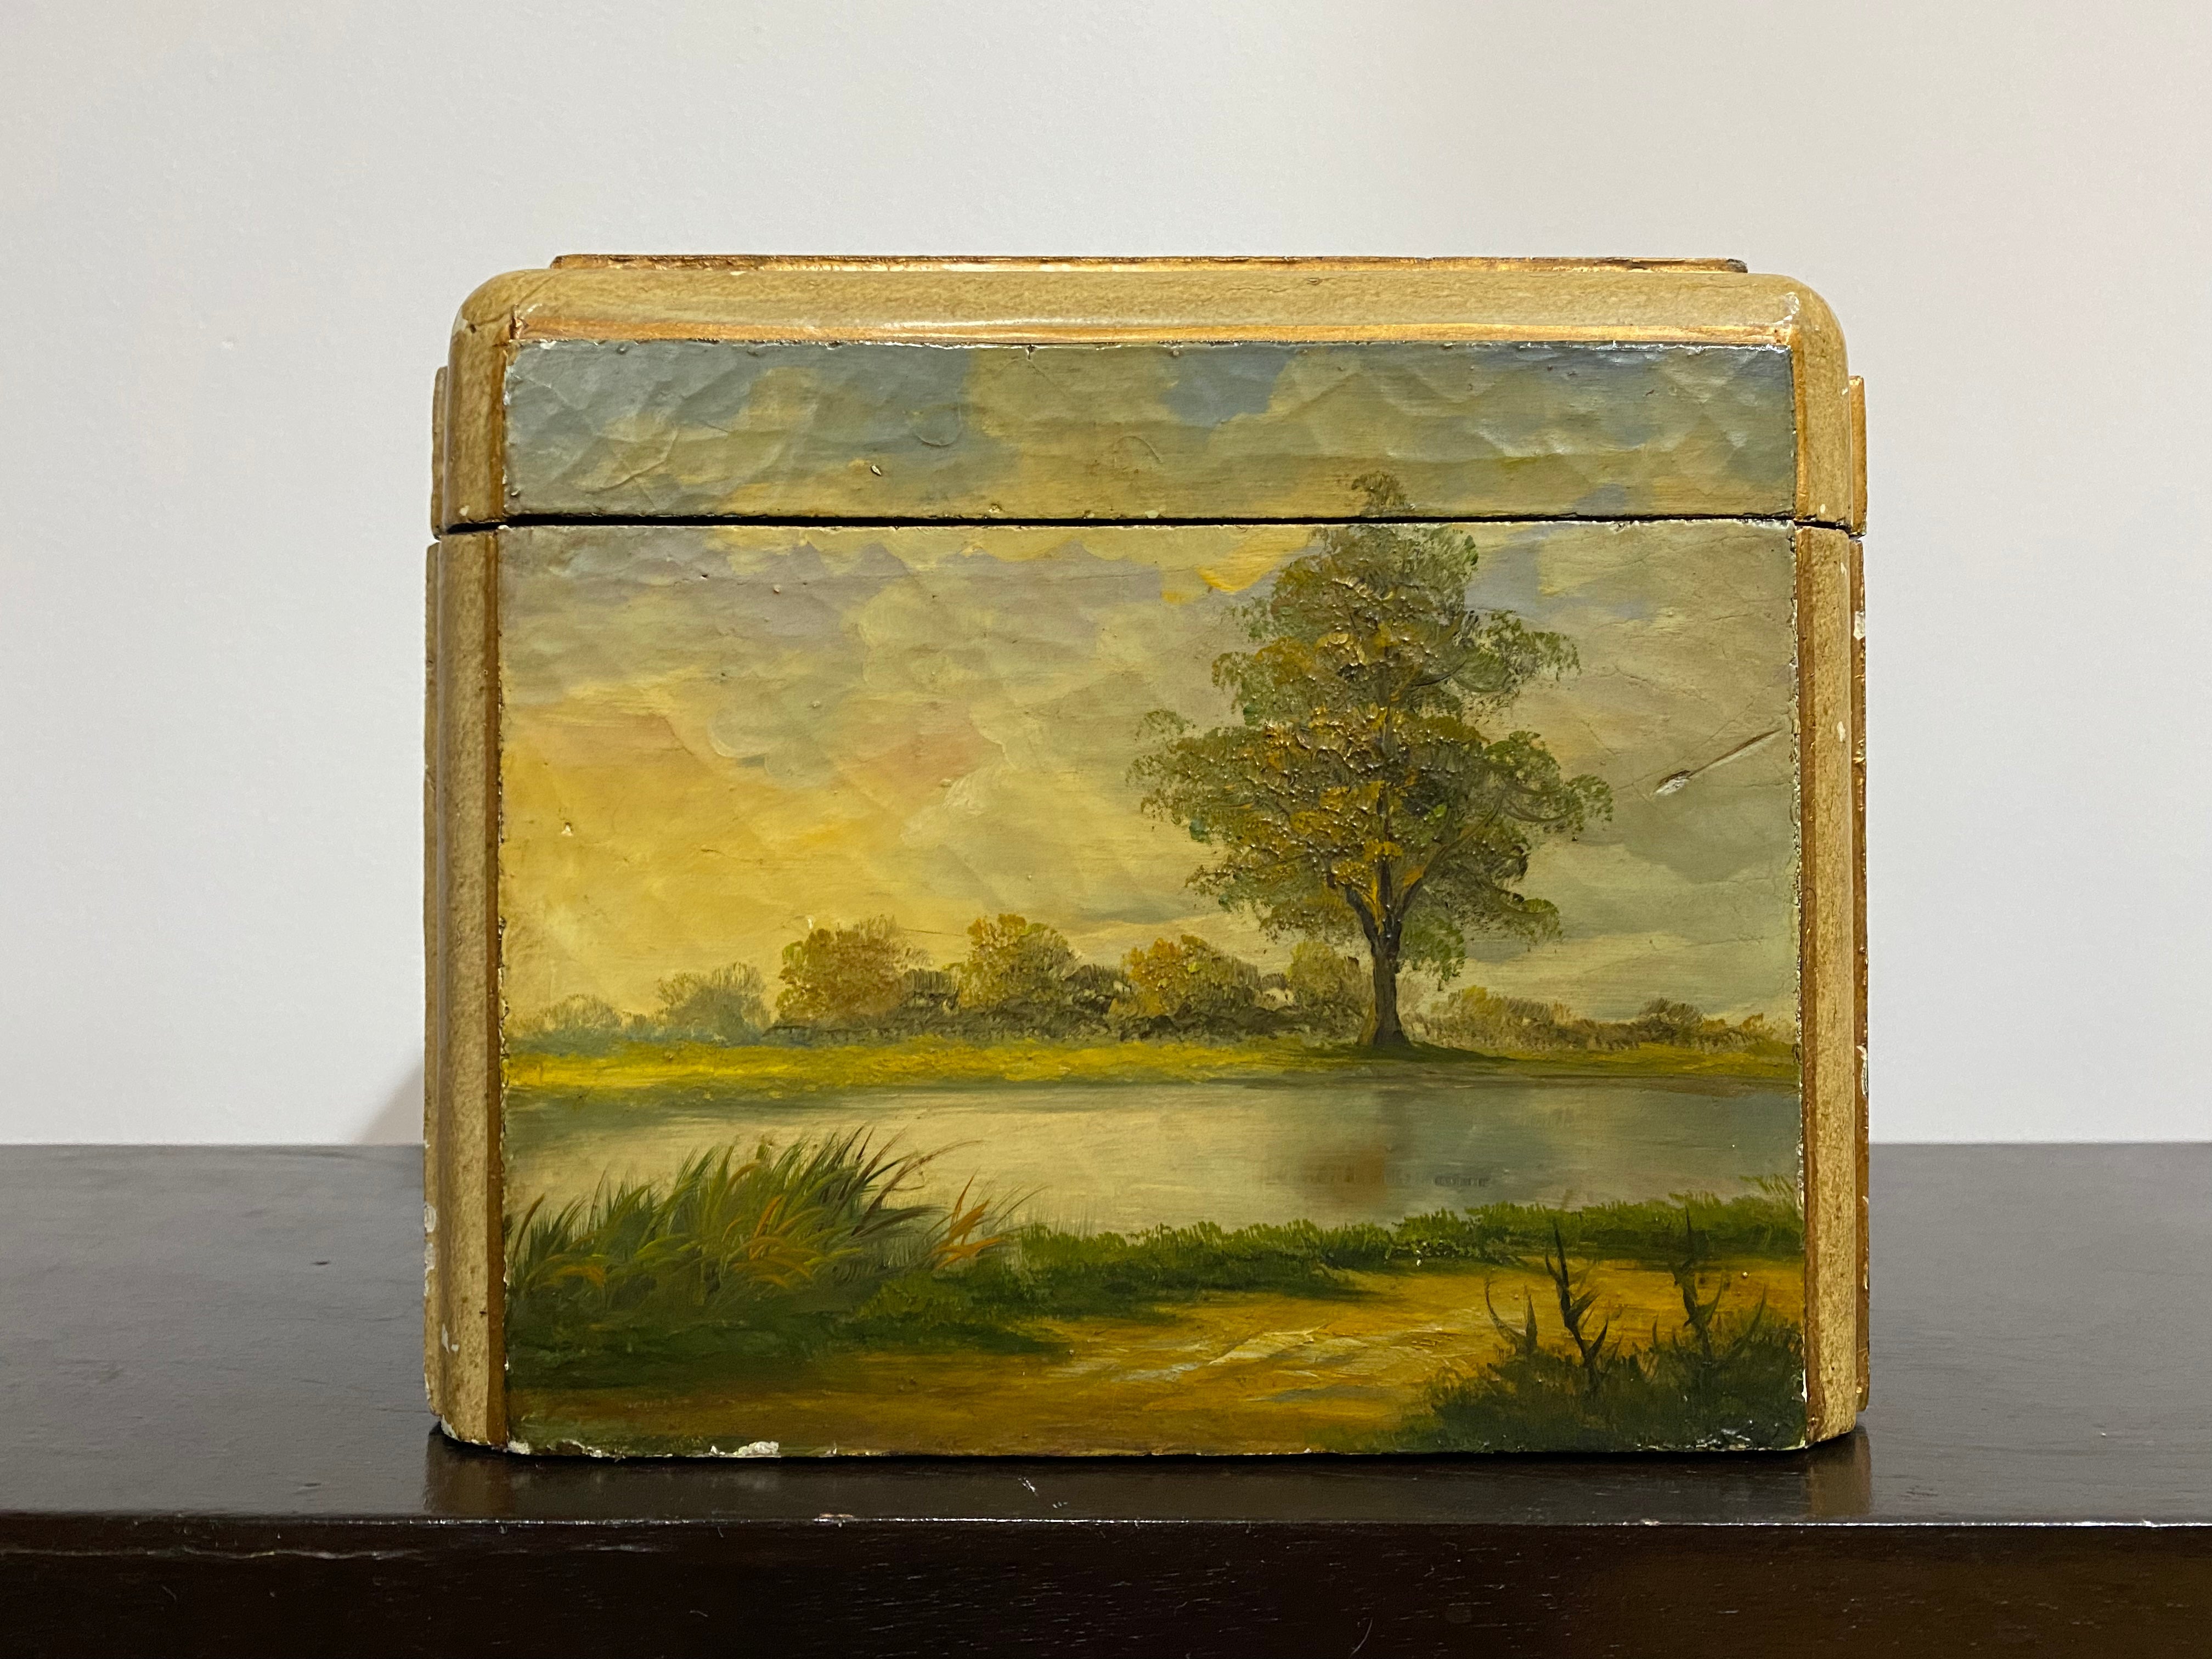 wood box, hand-painted, made in USA 1940s